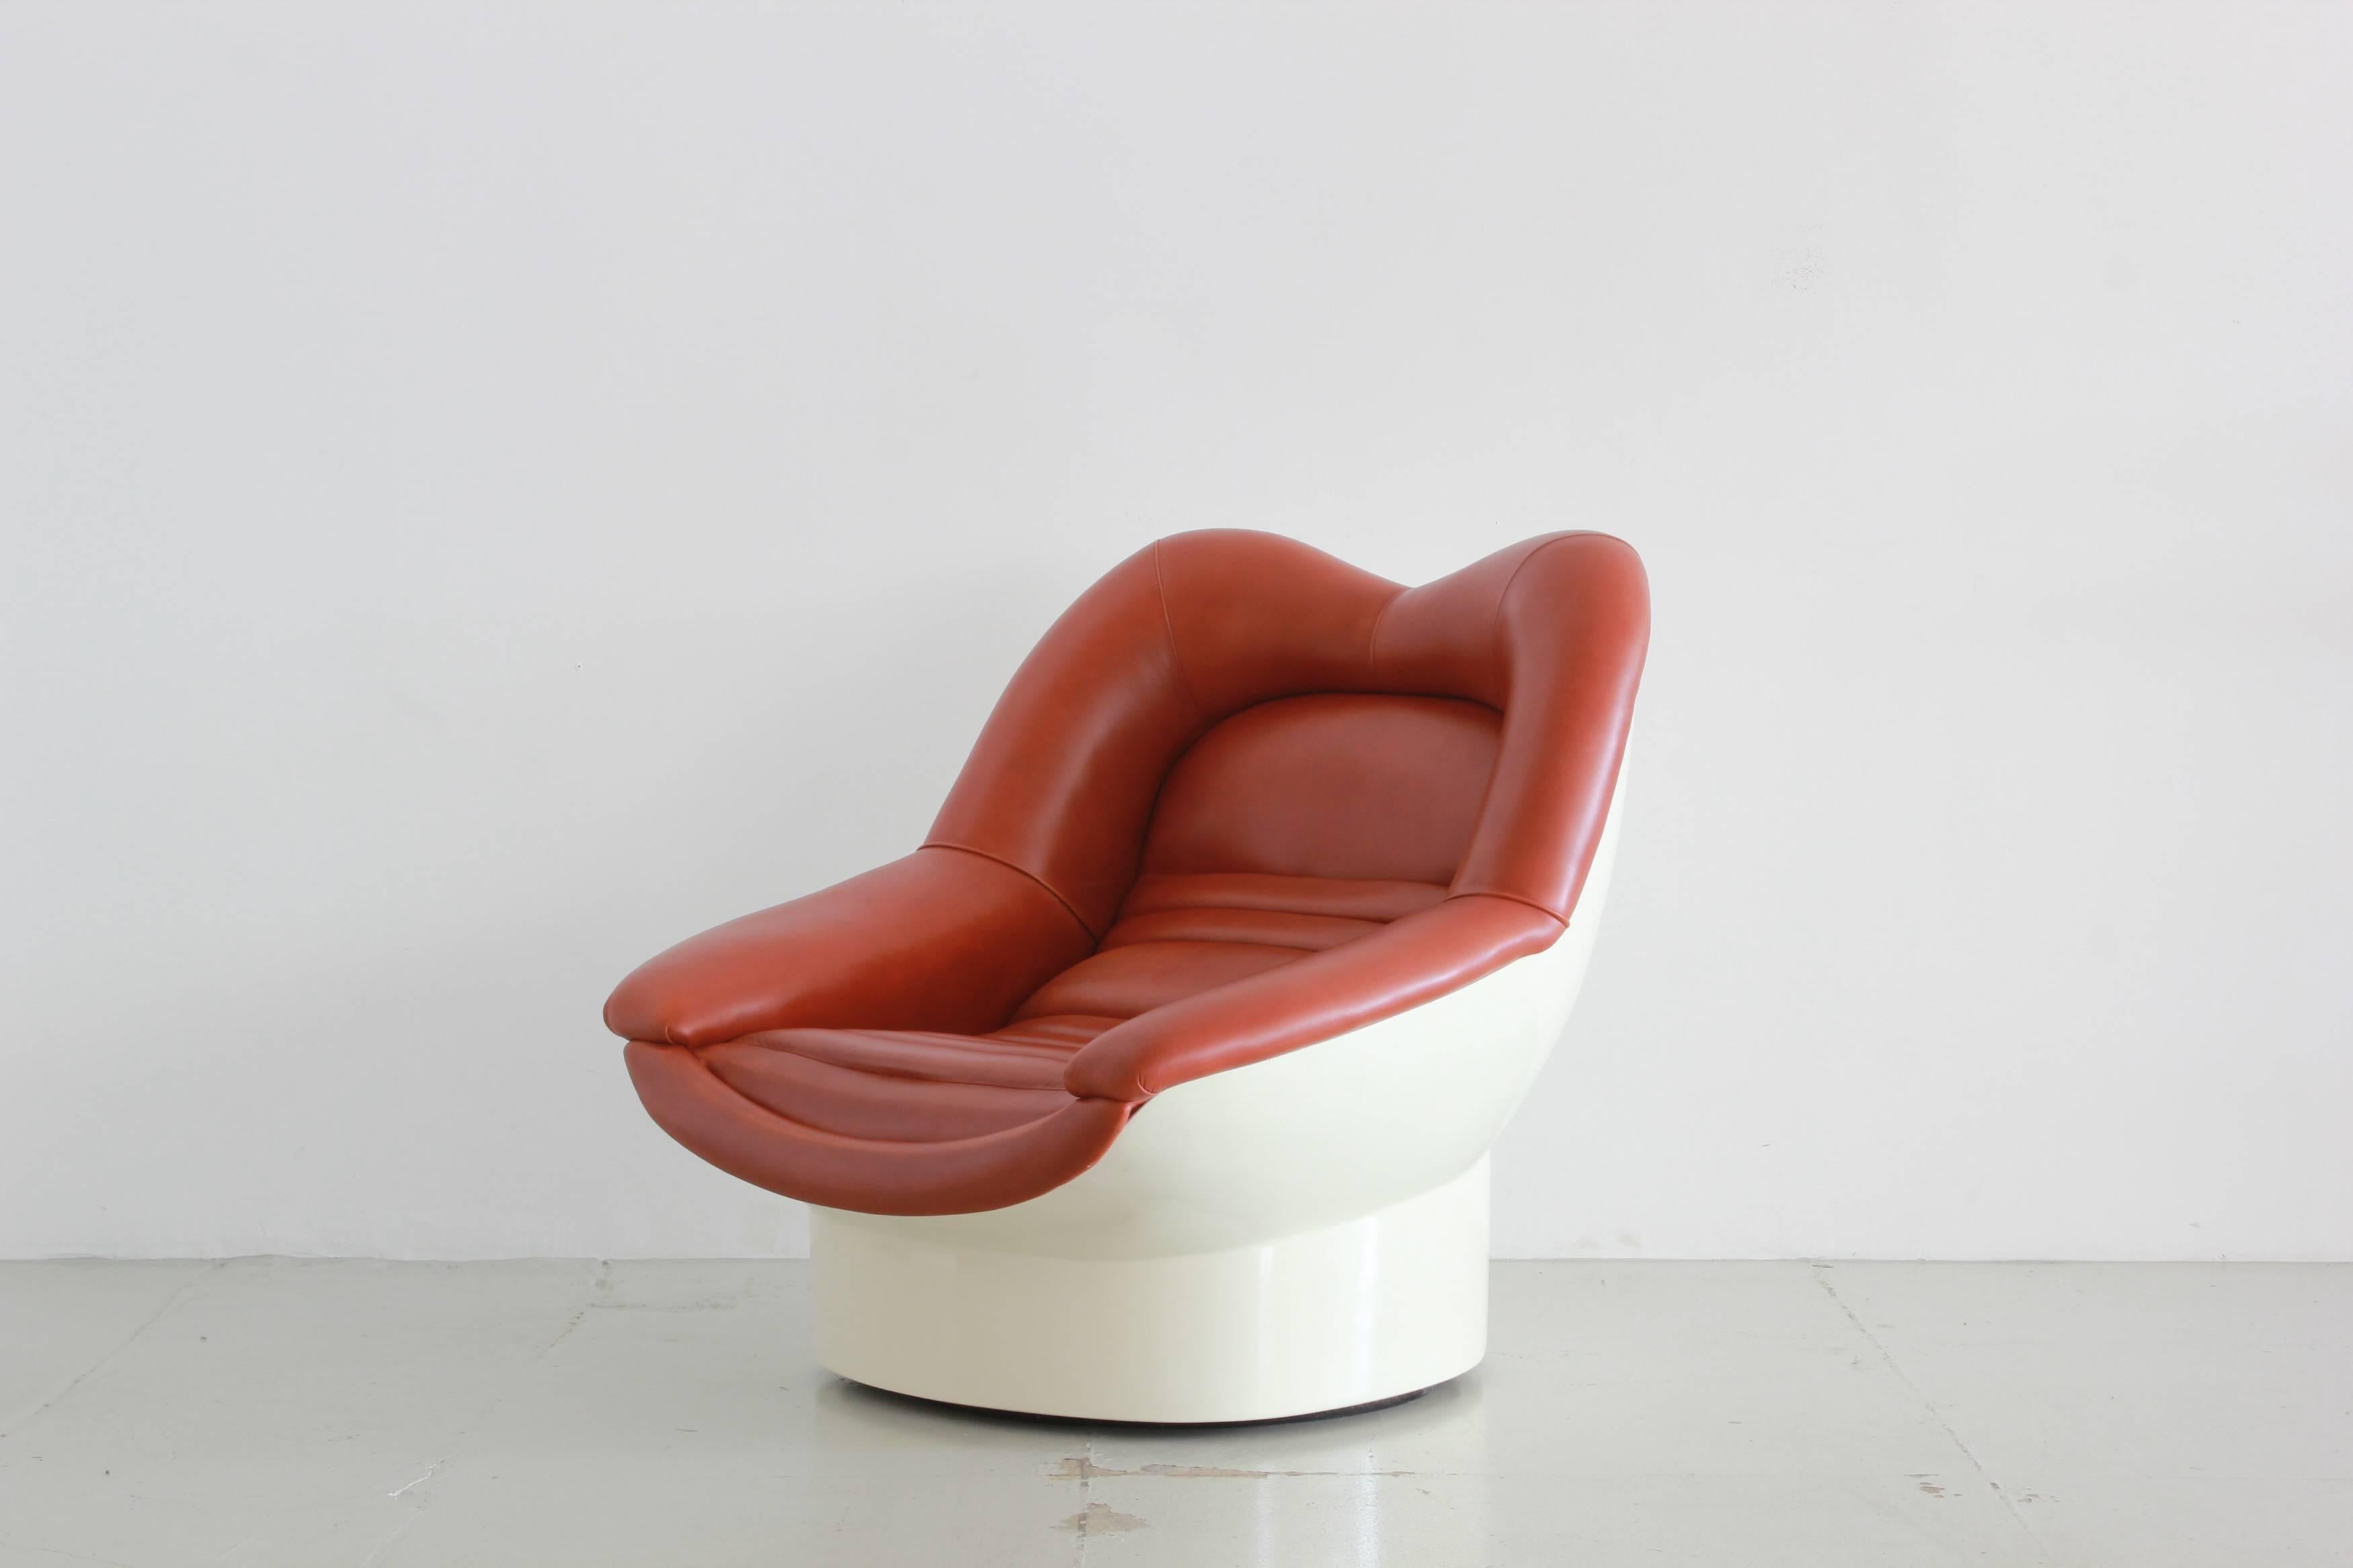 Incredible 1966 swivel chair by Italian designers Cesare Casati and Enzo Hybsch. Channel tufting leather and a curved reinforced fiberglass frame give this a one-of-a-kind modern look. A statement in any space.